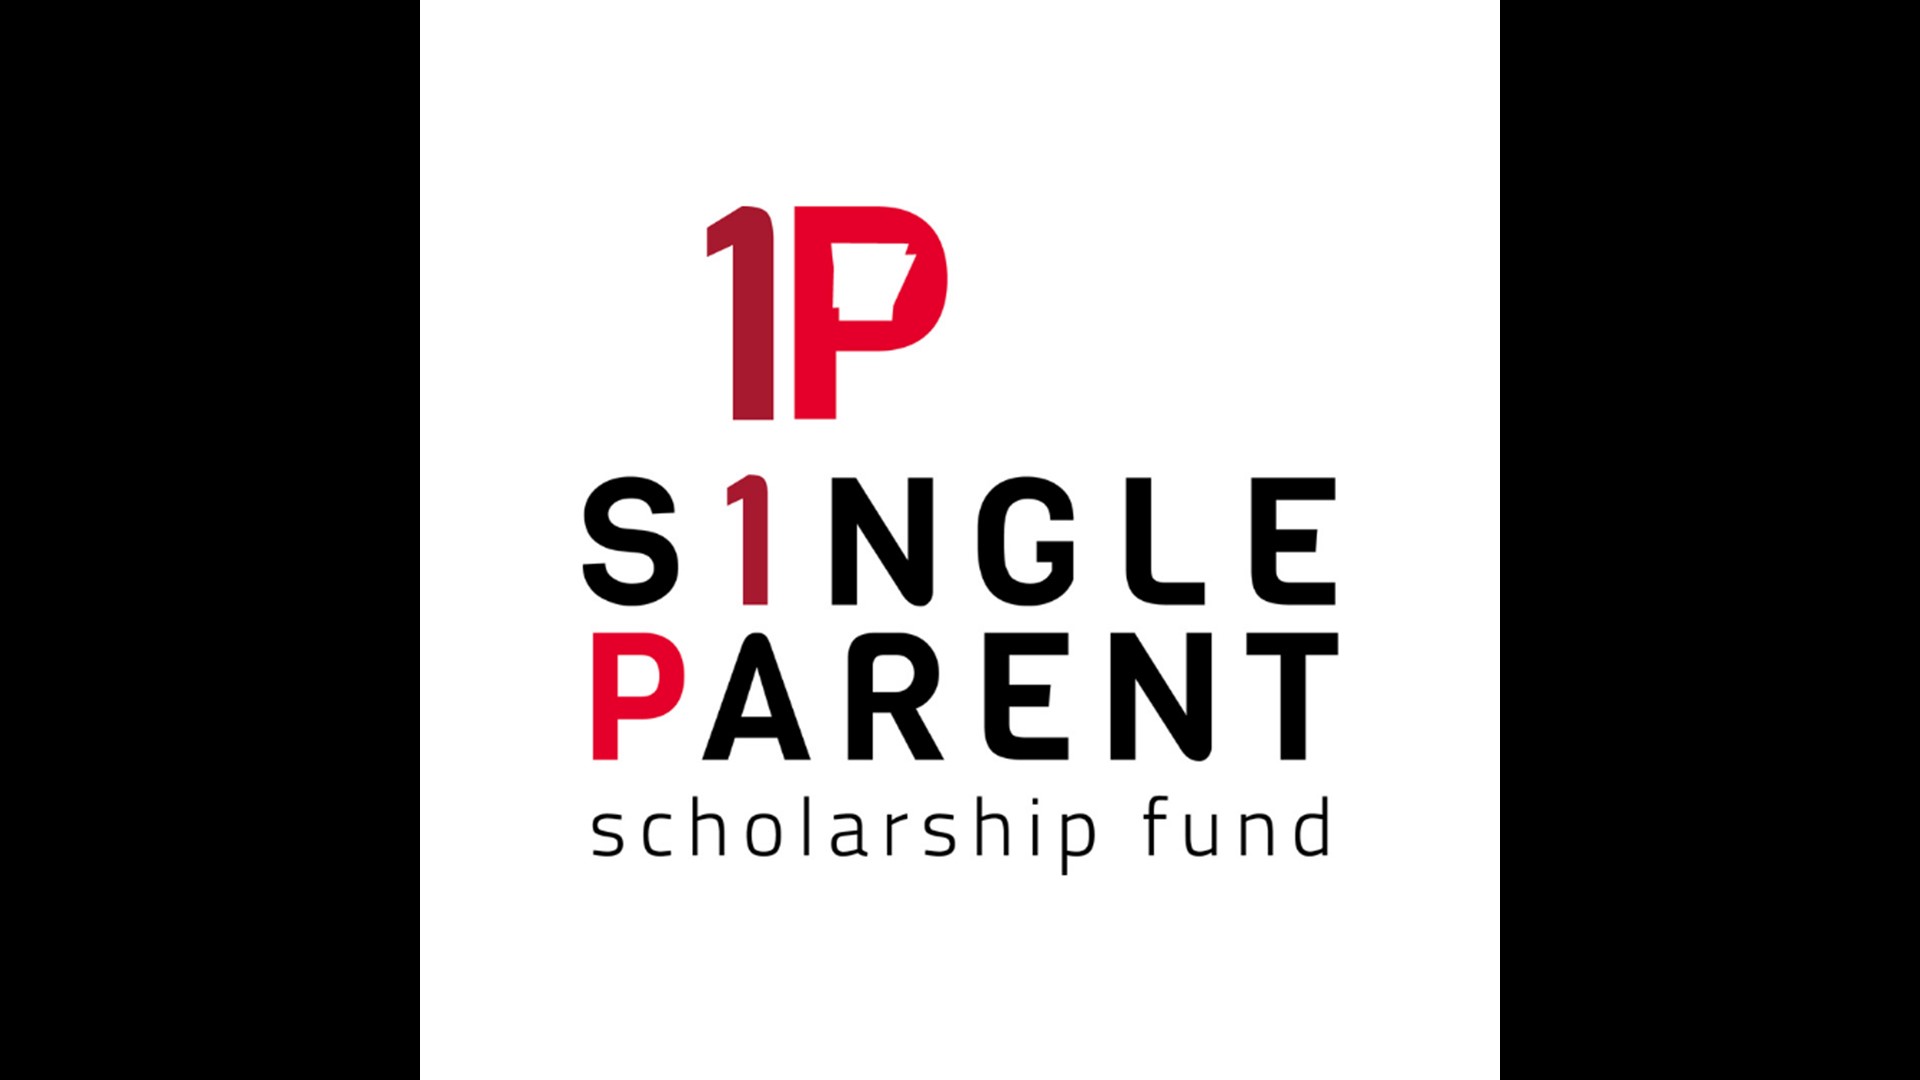 The Arkansas Single Parent Scholarship Fund in Fort Smith is hosting the country artist for a fundraising concert.  Daren has details on the fund and the concert.